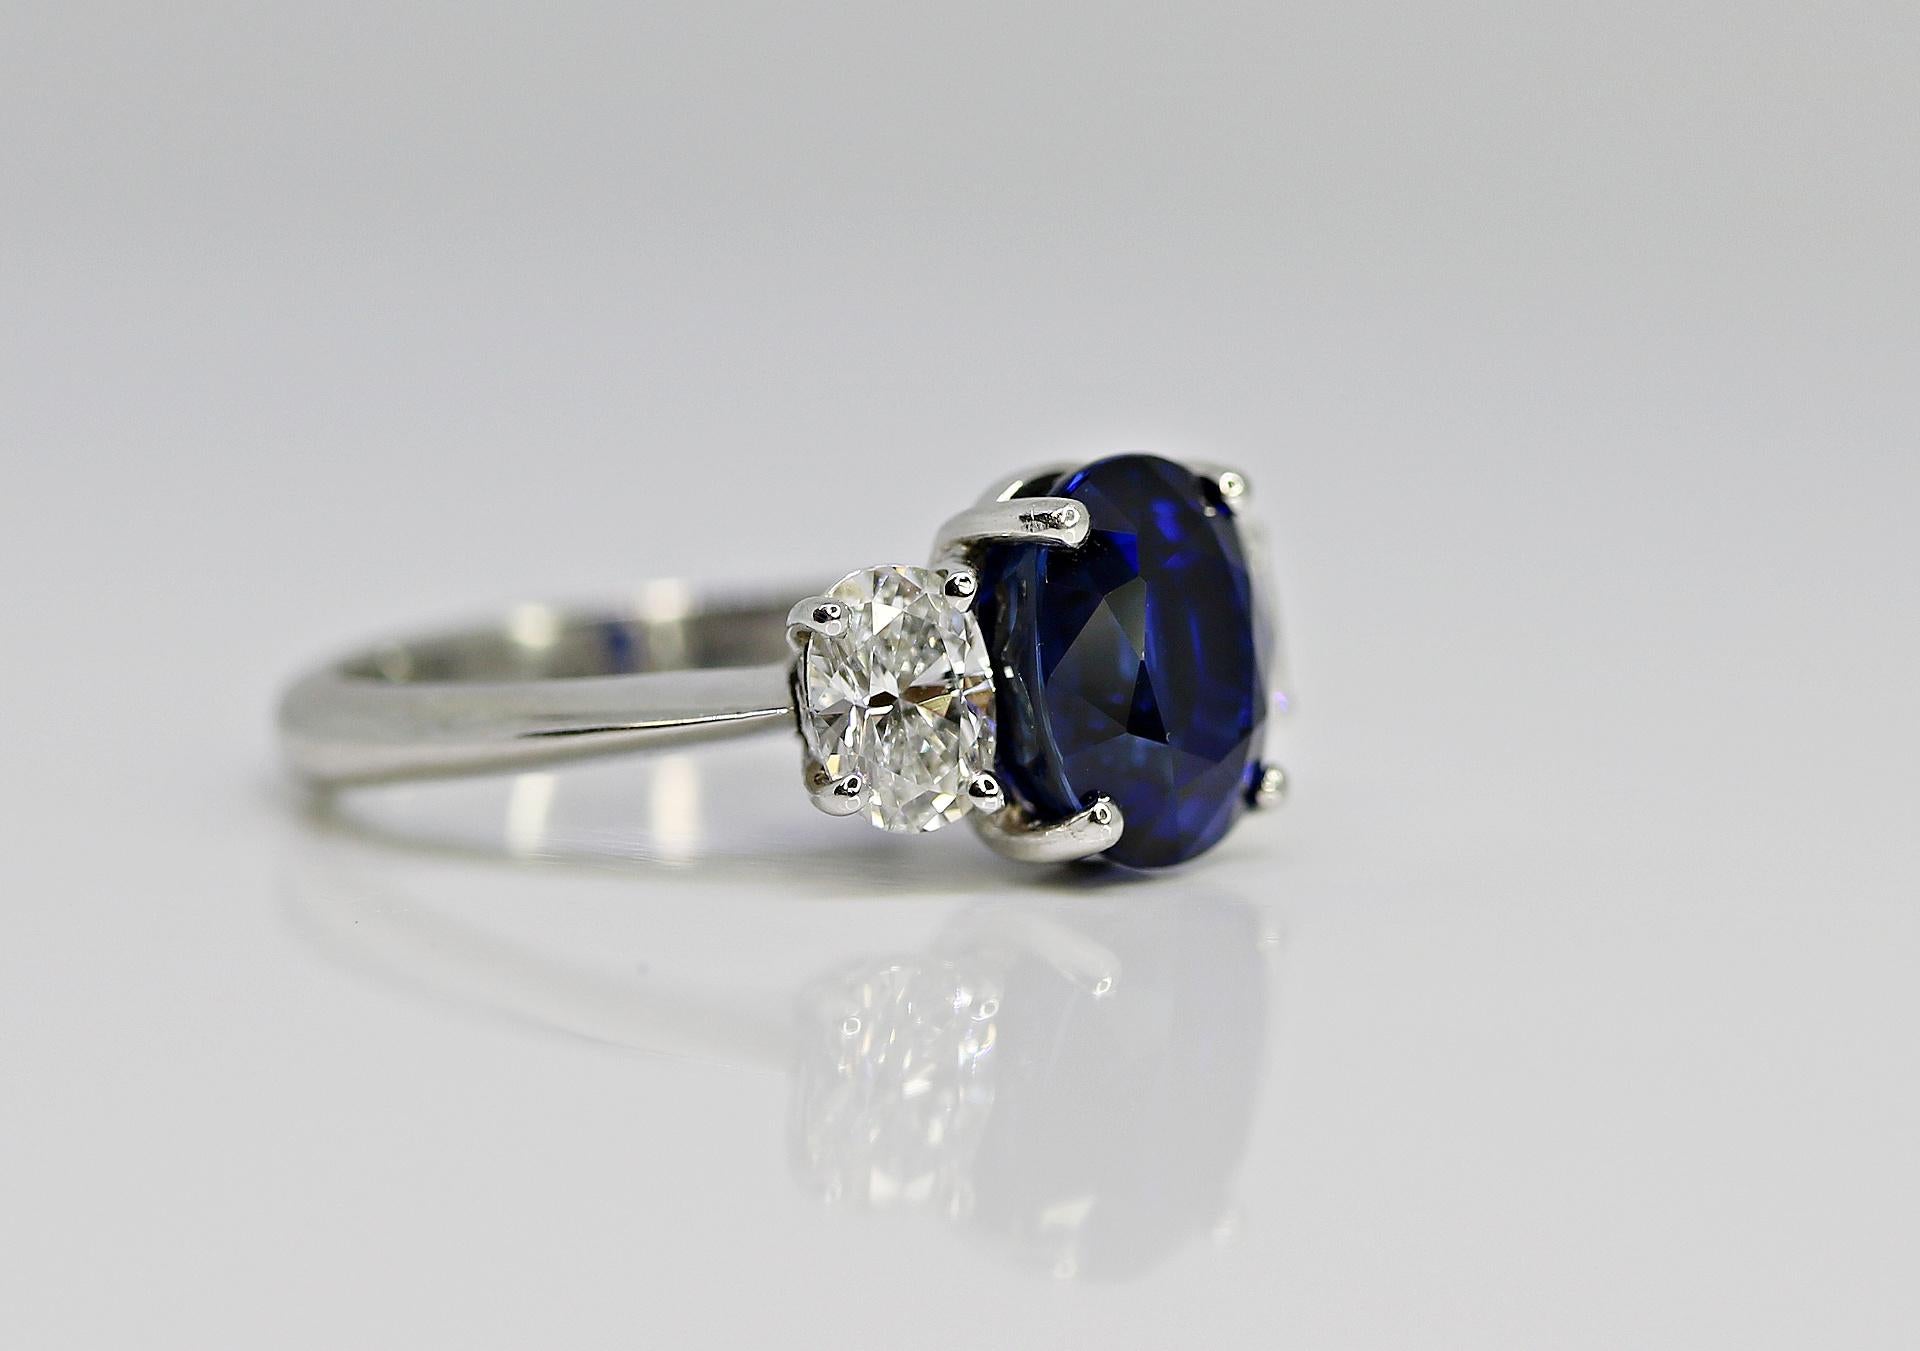 This 4.03ct Blue sapphire Oval is set in a Platinum ring with 2 side oval diamonds totaling in weight =0.70ct

This Sapphire is GIA certified #5182780792